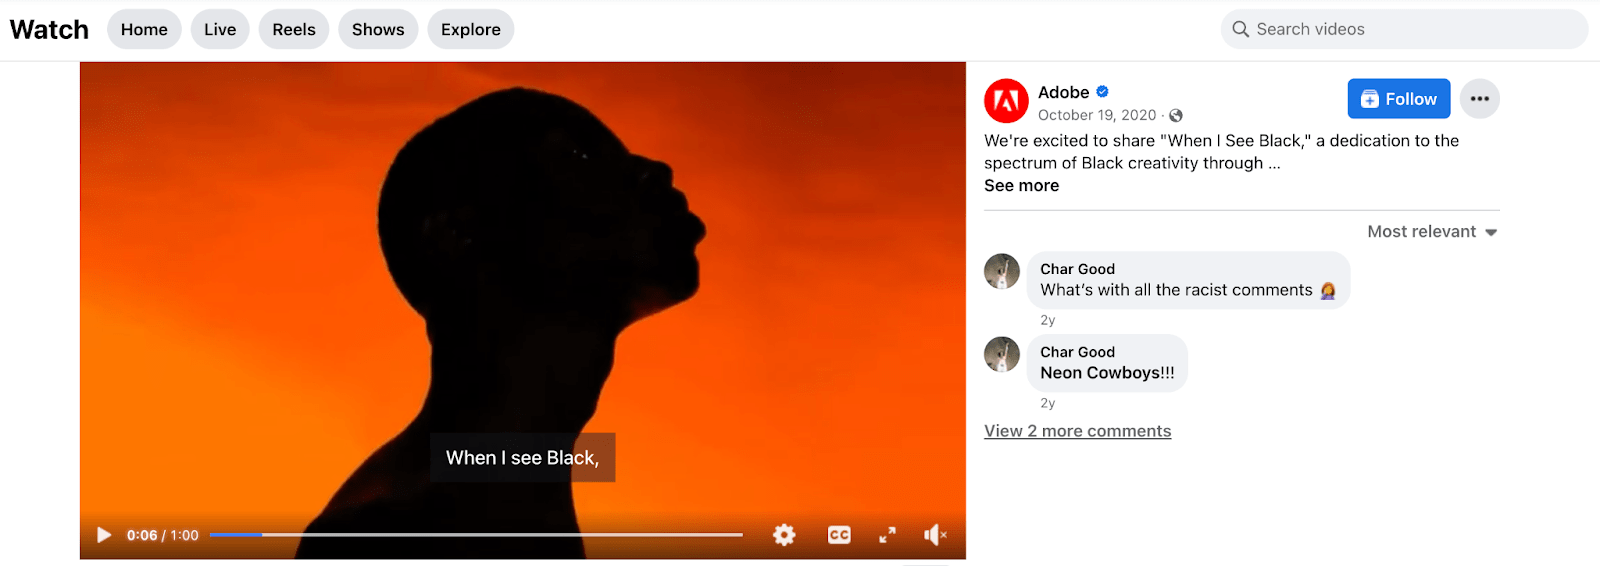 Facebook post from Adobe's "When I See Black" multicultural marketing campaign